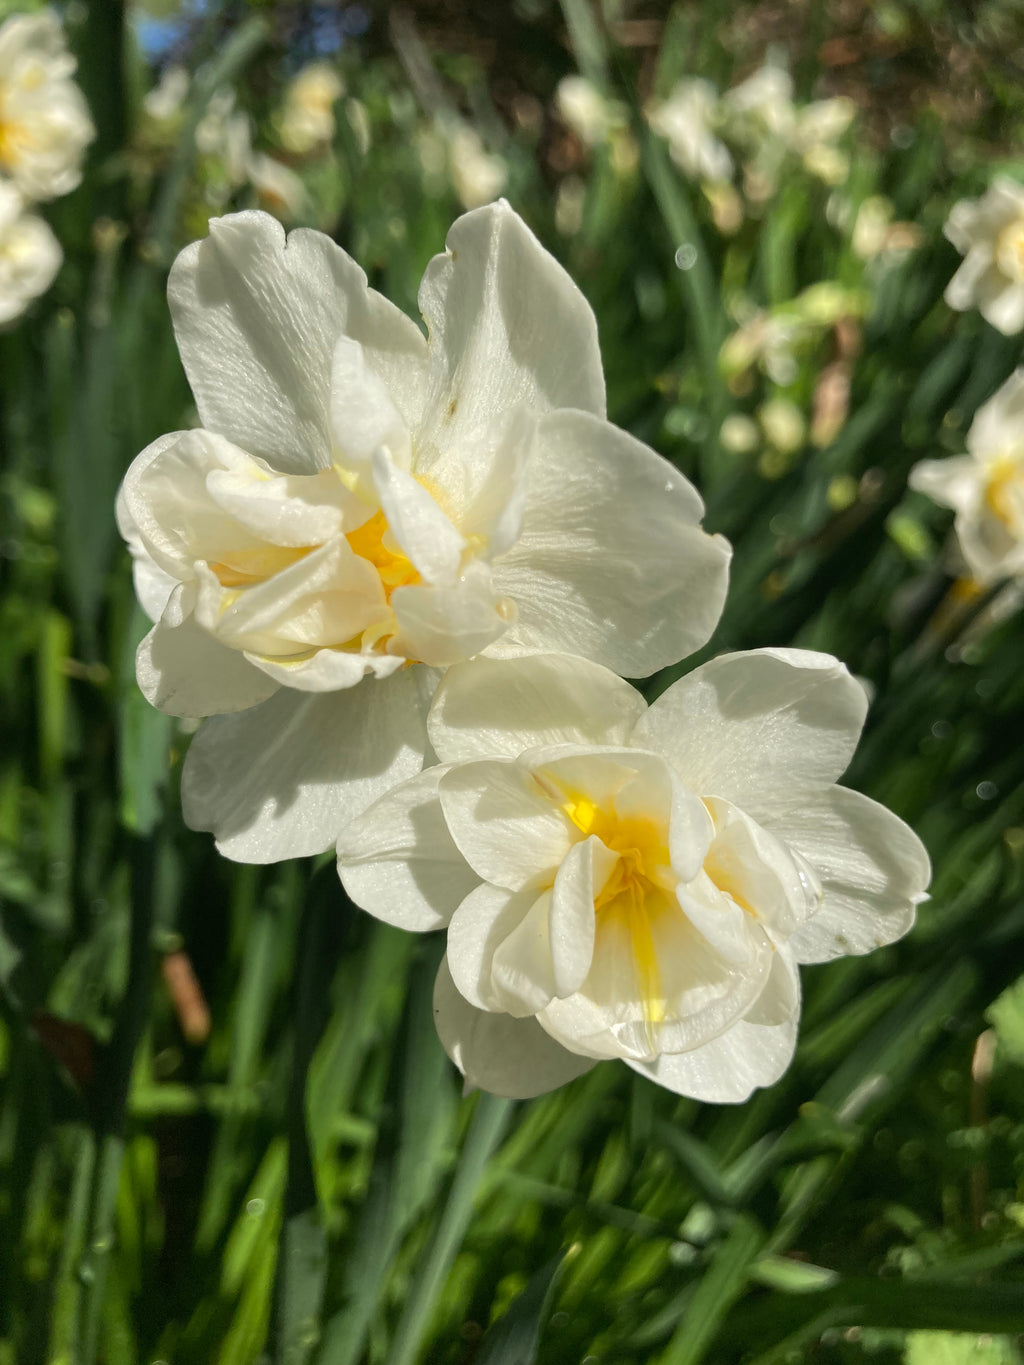 Daffodil 'The Bride' Bulbs (Narcissus) Free UK Postage